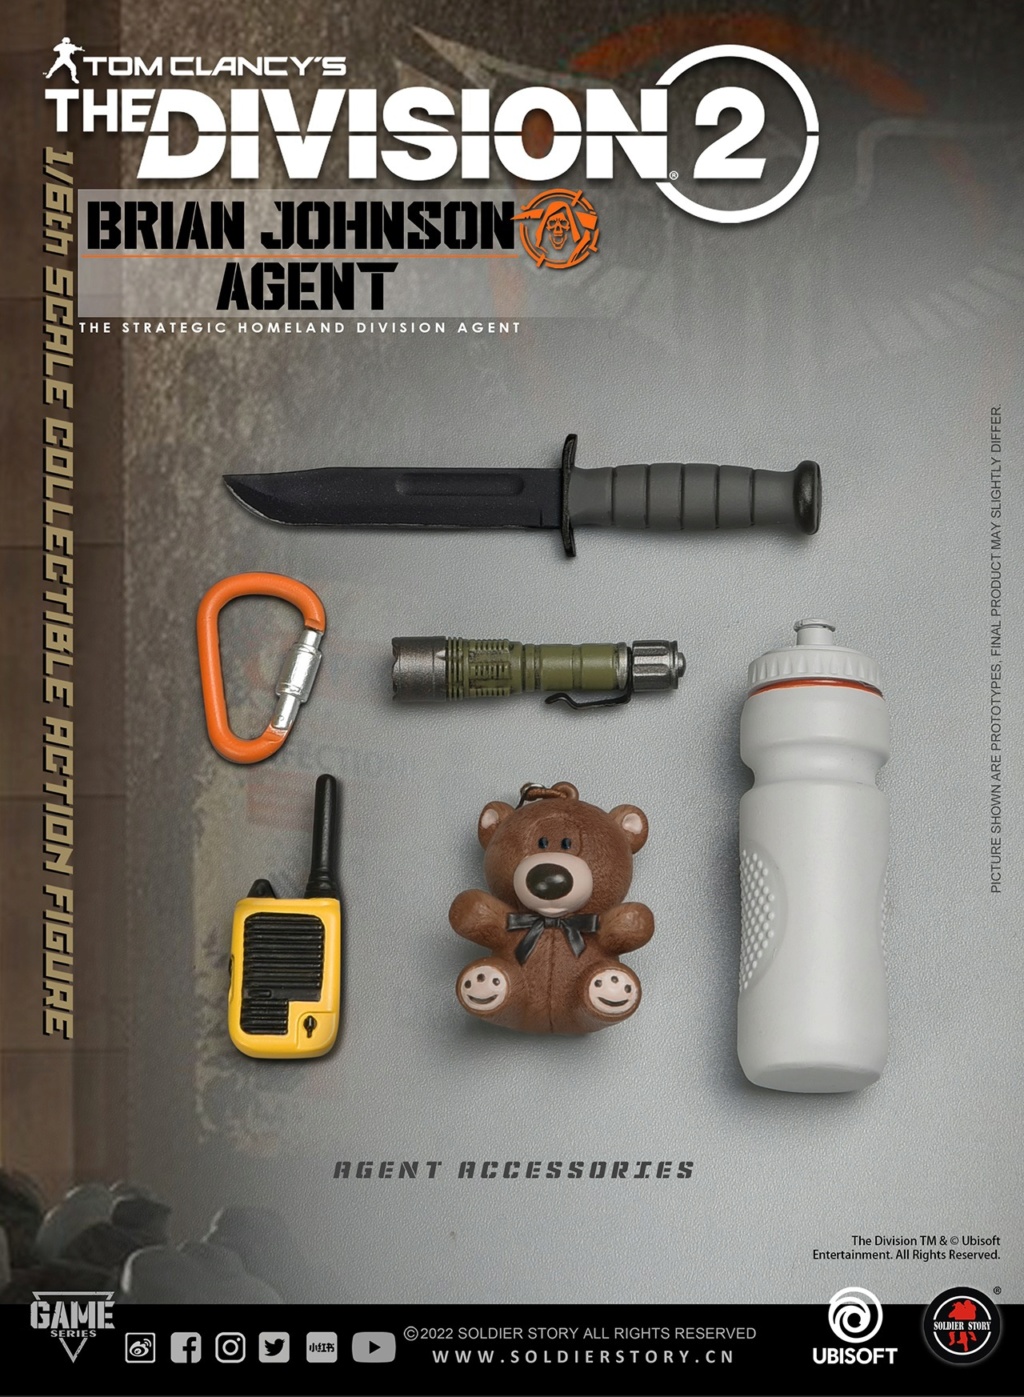 TheDivision2 - NEW PRODUCT: Soldierstory: 1/6 Tom Clancy's The Division 2 - Agent Brian Johnson Universal/Deluxe SSG-005/006 22230210